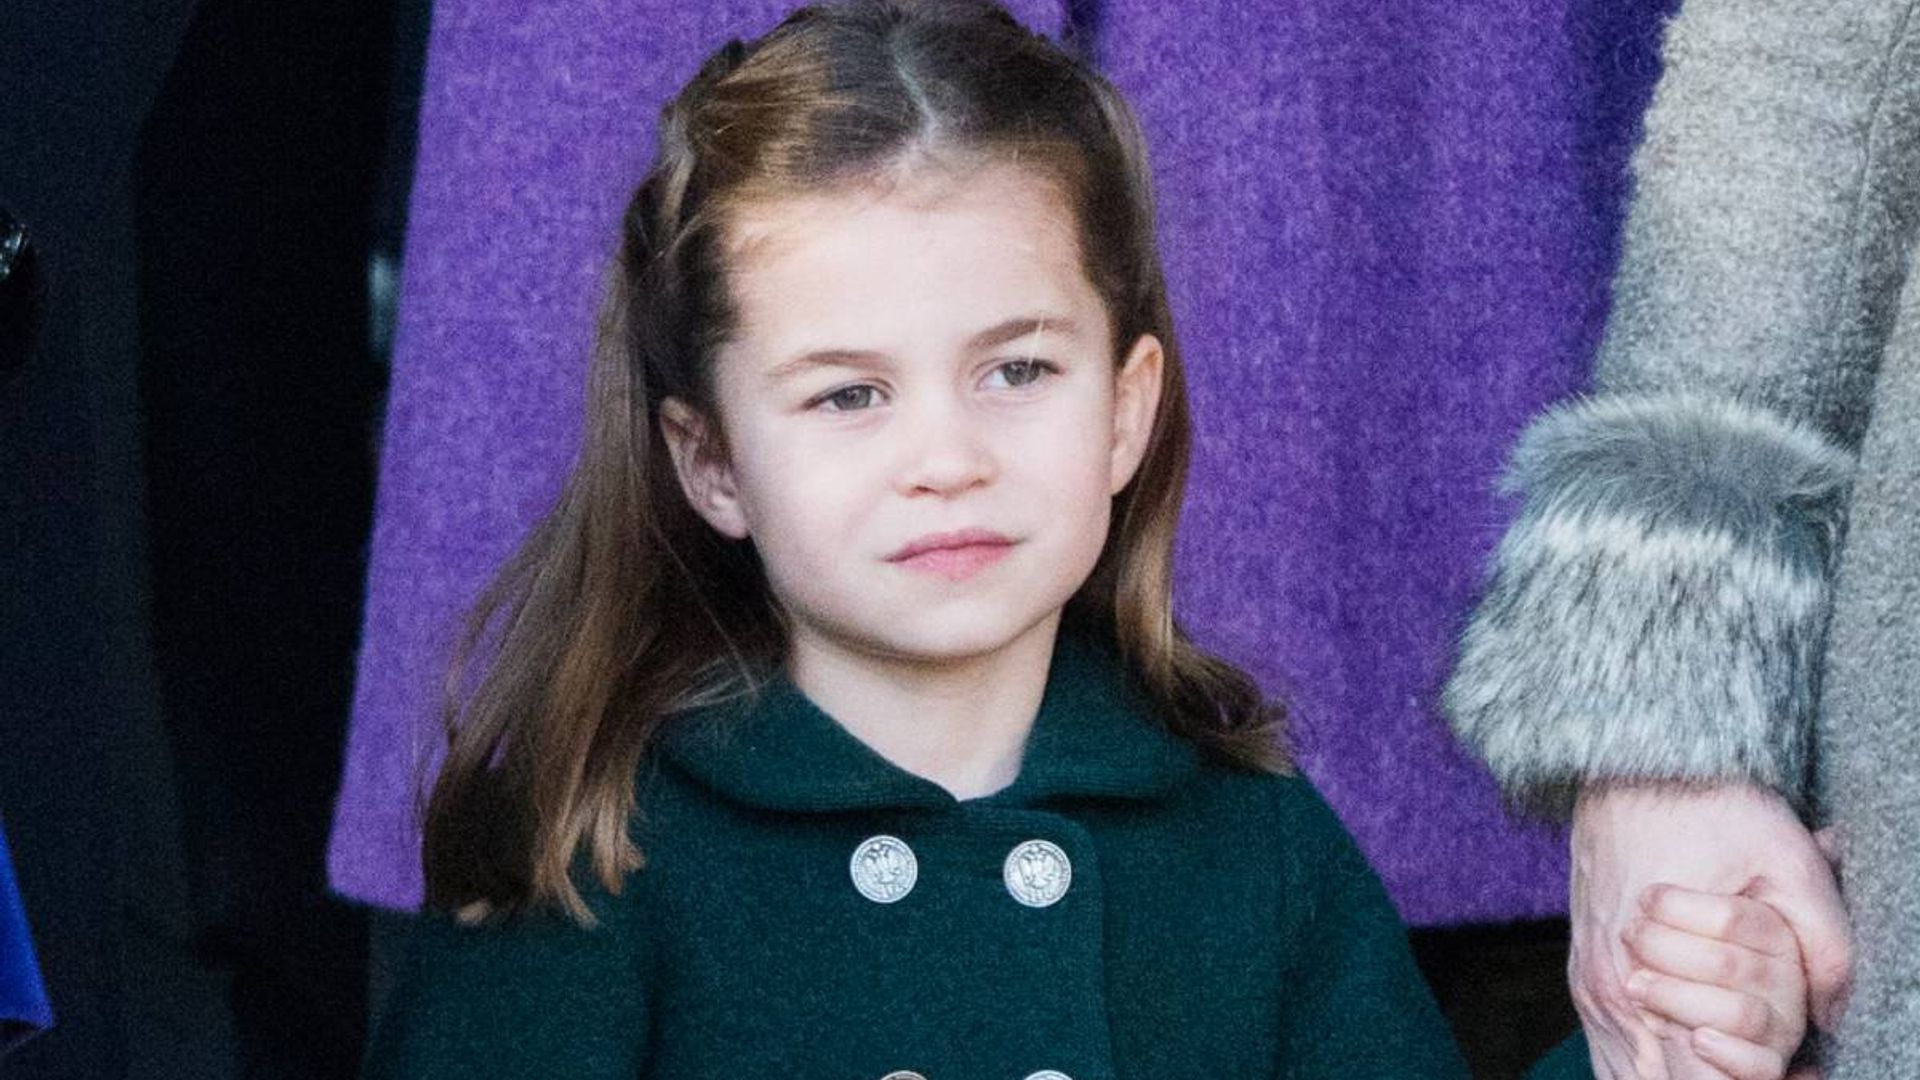 Princess Charlotte is the double of relative Lady Kitty Spencer in adorable photo